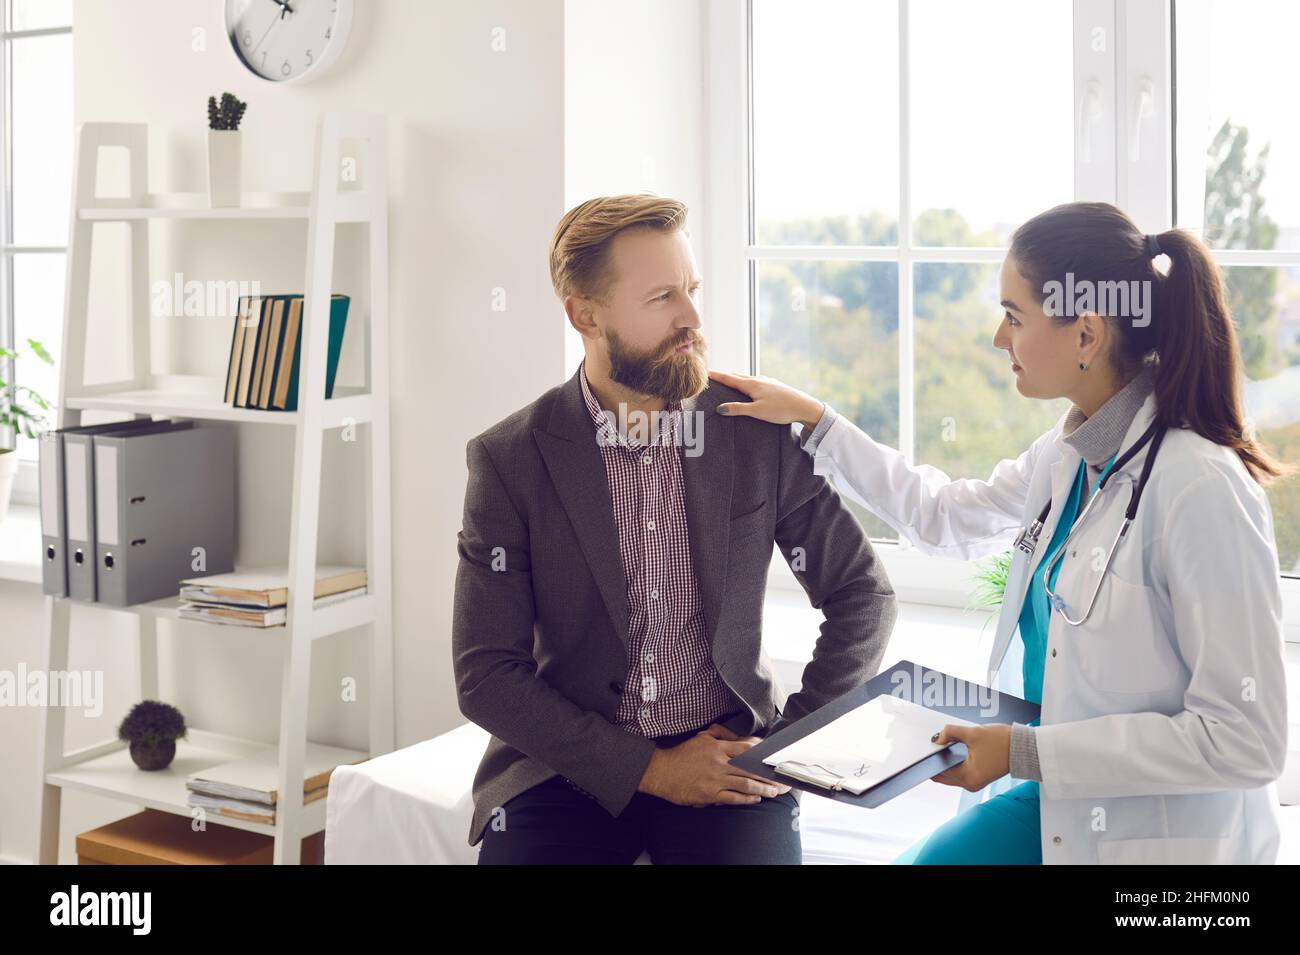 Man listening to doctor who is reassuring him and giving him advice, support and hope Stock Photo